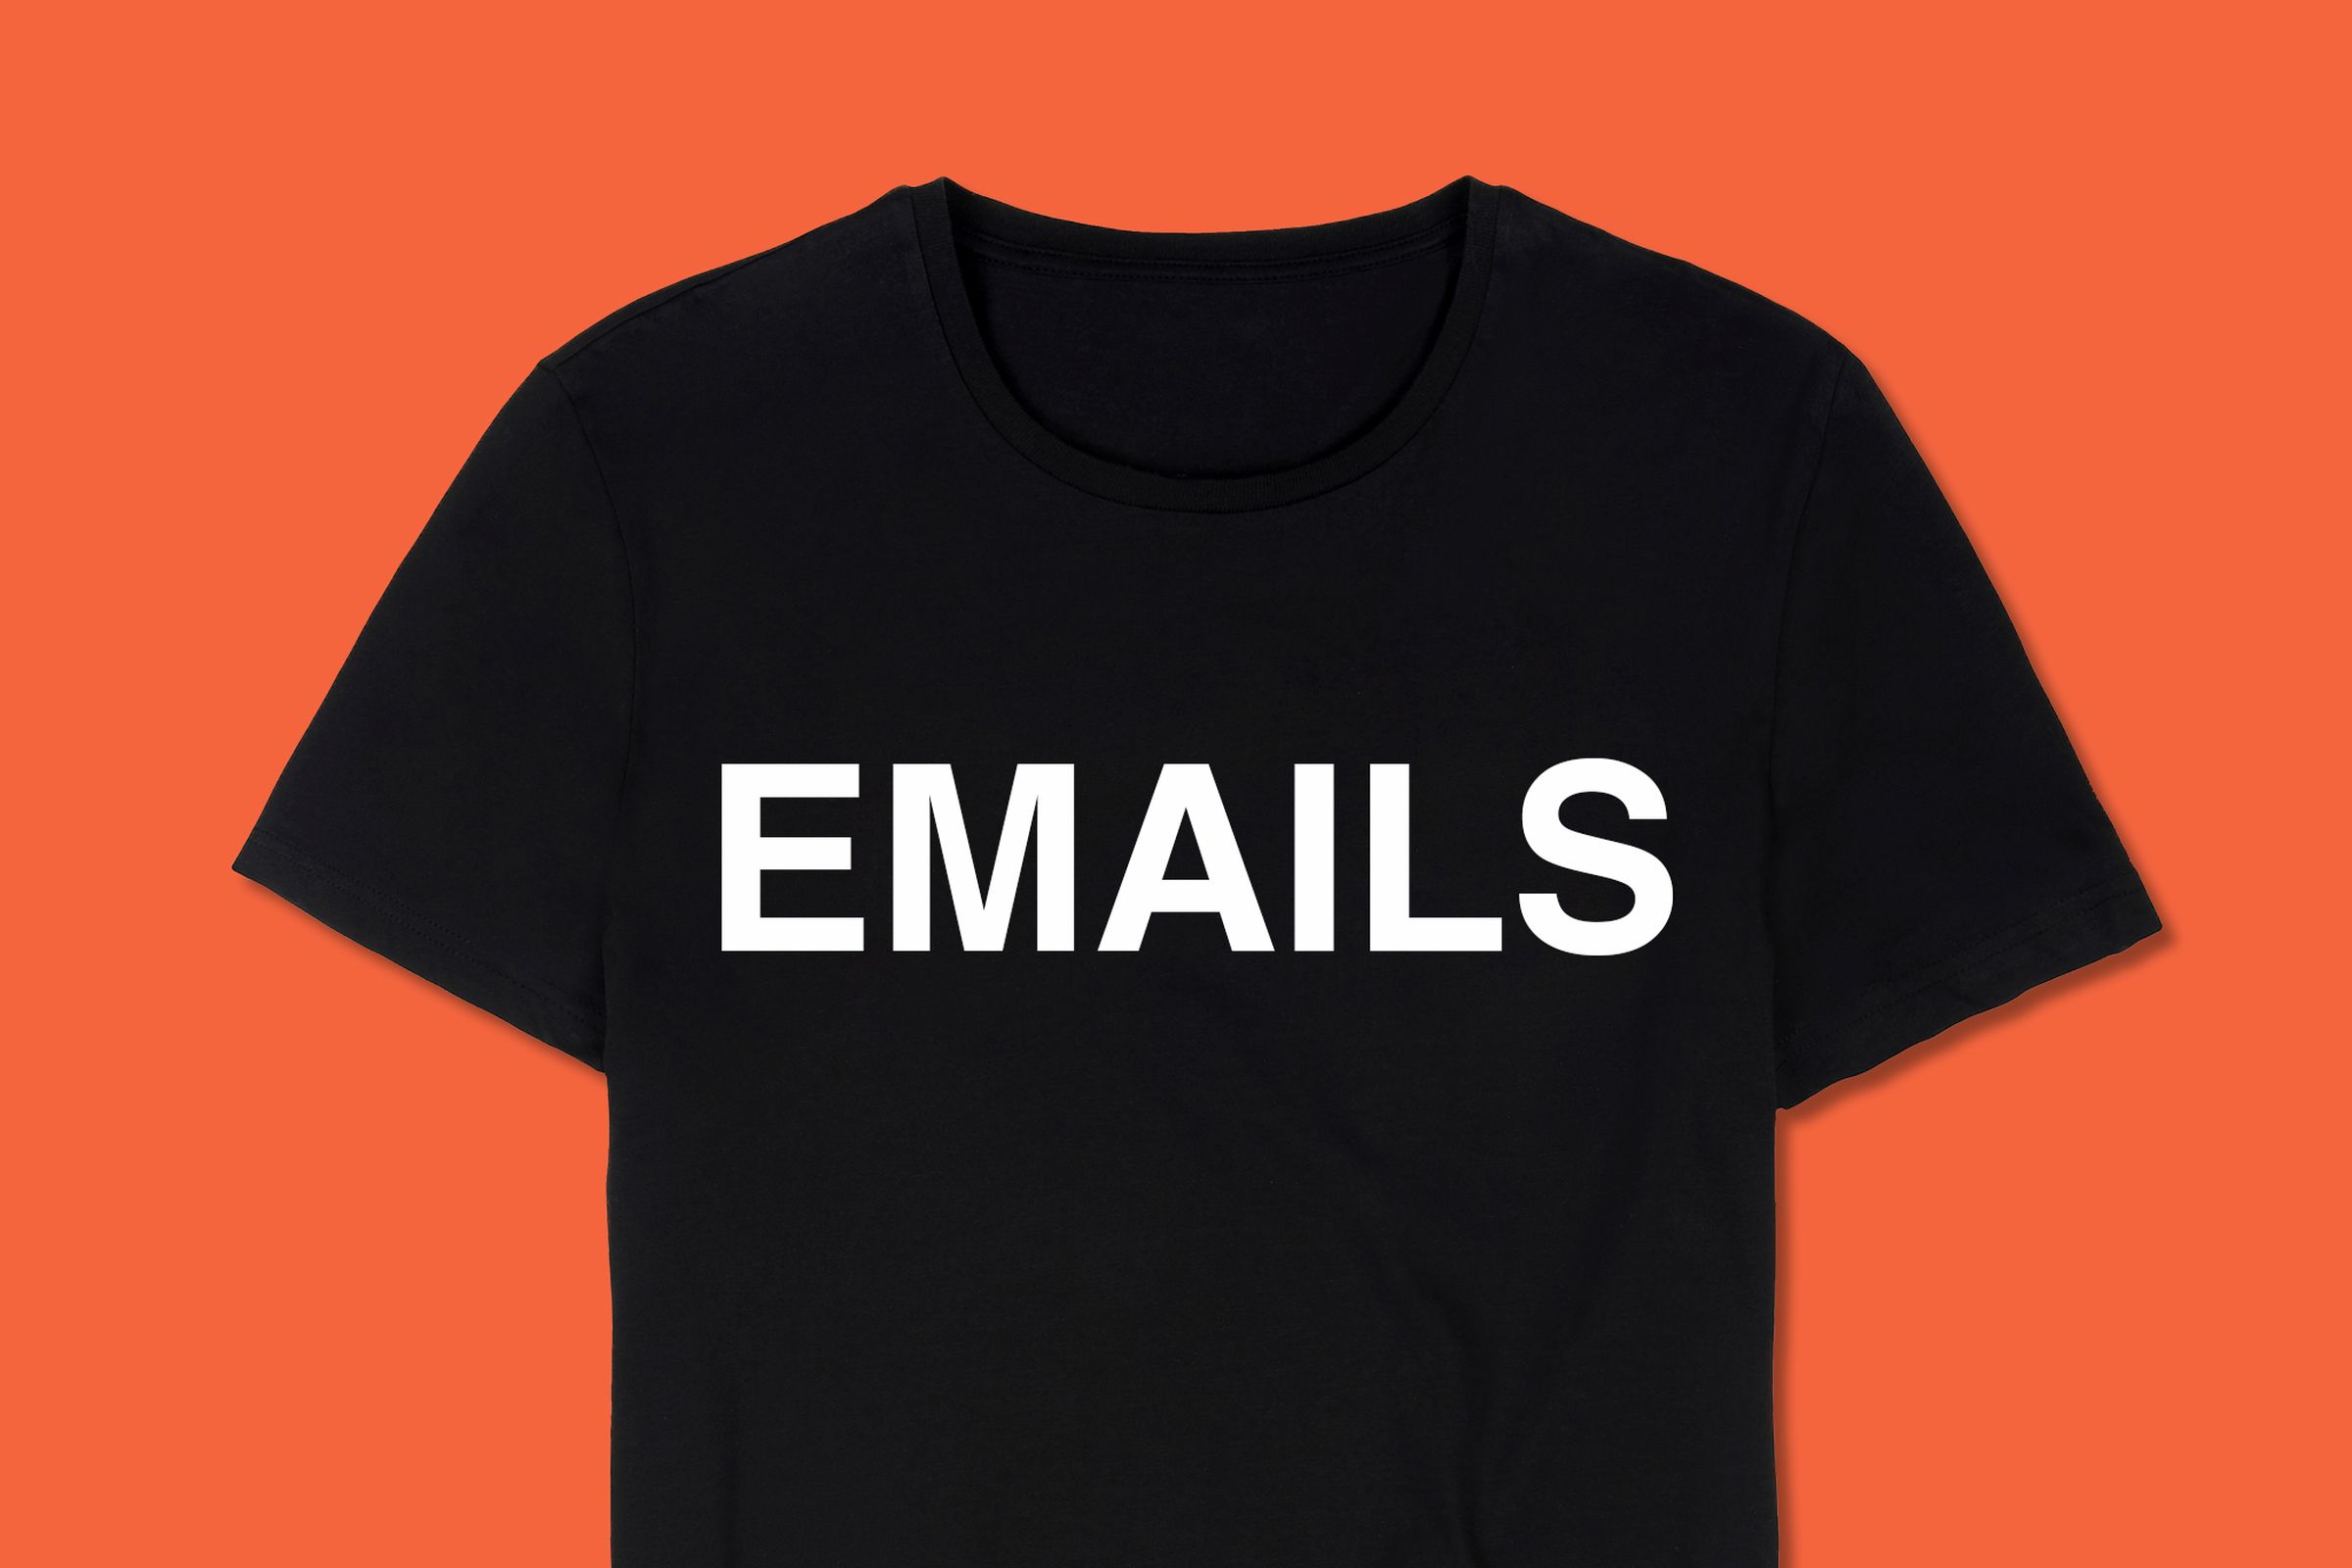 The Verge’s EMAILS shirt, which is definitely coming back soon